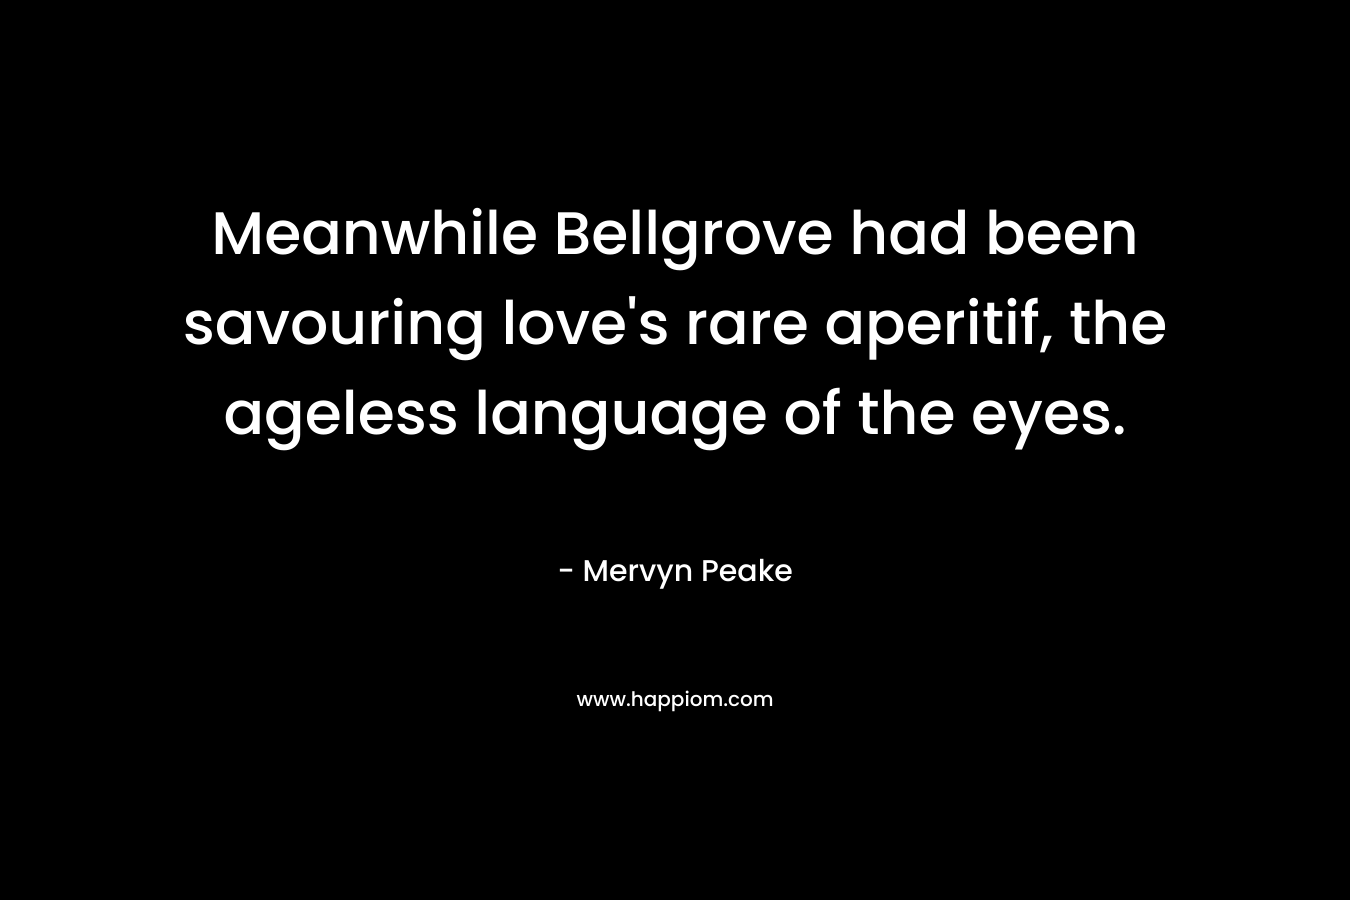 Meanwhile Bellgrove had been savouring love’s rare aperitif, the ageless language of the eyes. – Mervyn Peake